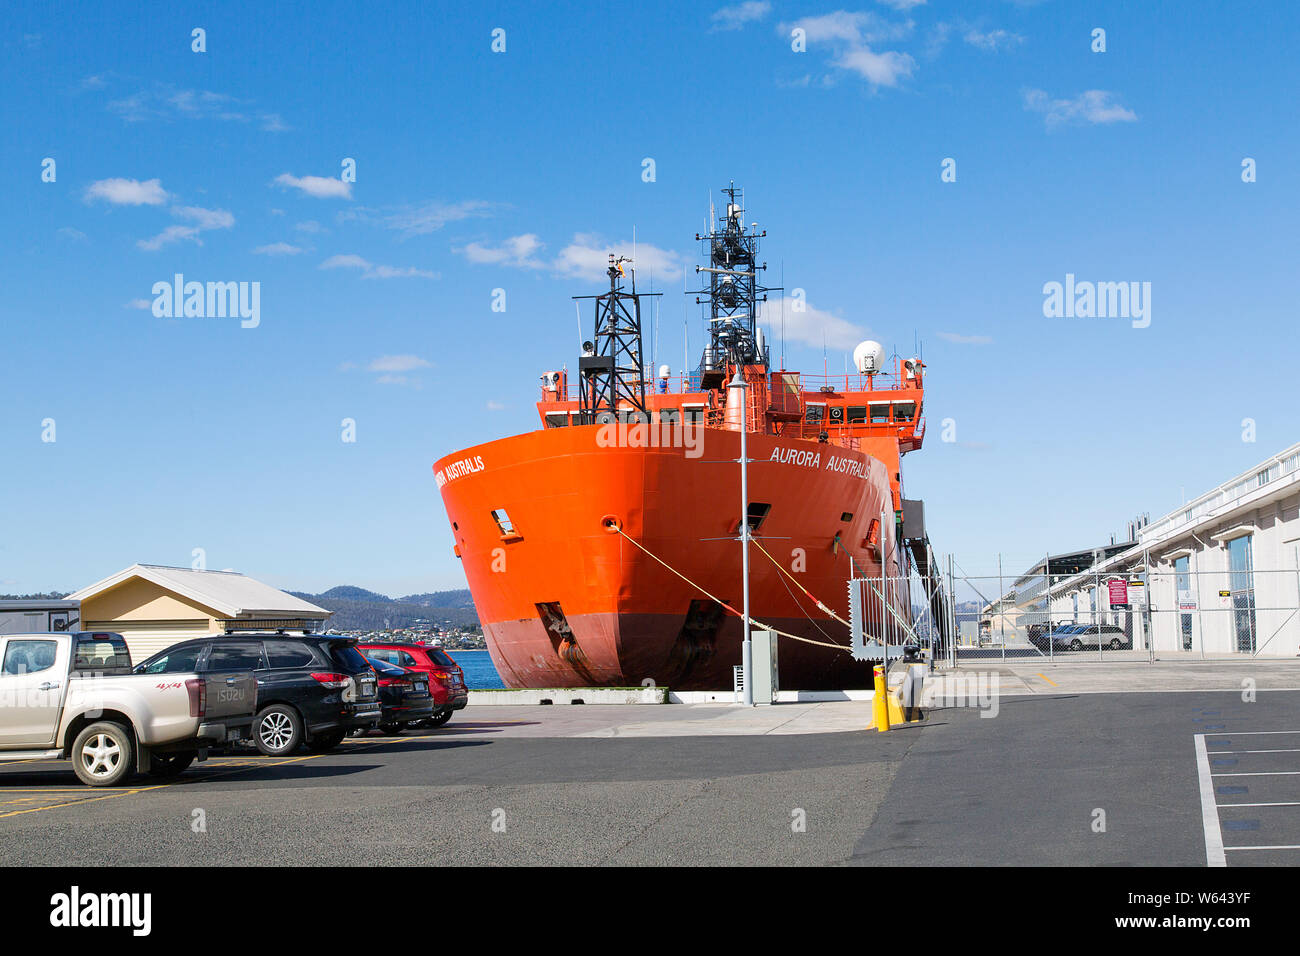 Hobart, Tasmania: April, 2019: Ice-Breaker Aurora Australis is owned by P&O Maritime Services. She cruises Antarctic waters conducting research. Stock Photo